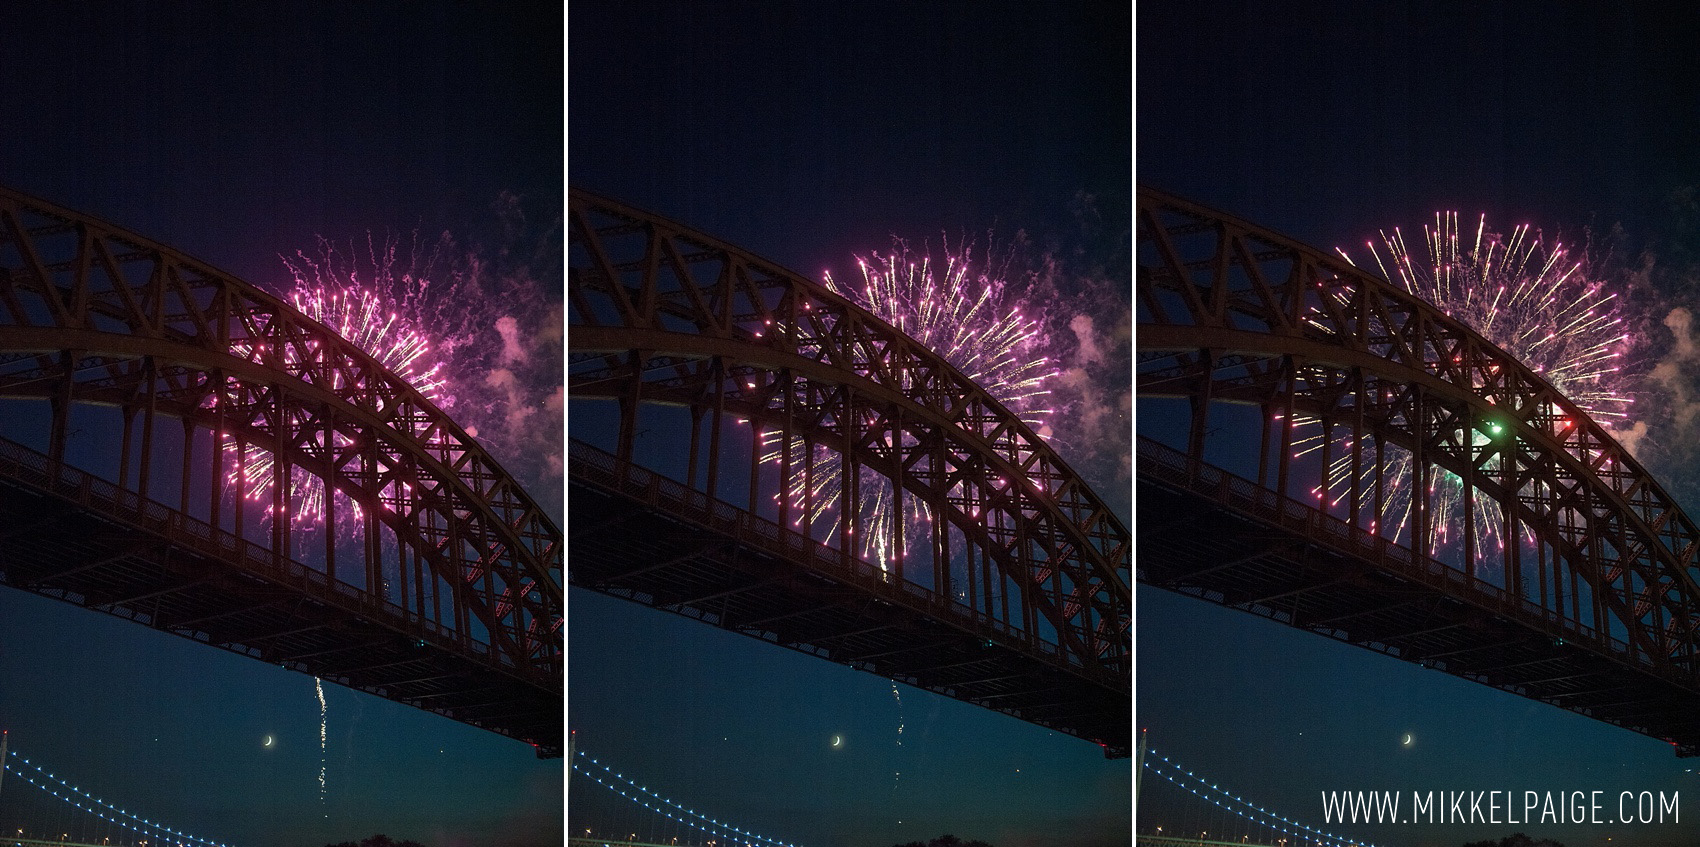 Fireworks photography tips for DSLR cameras by Mikkel Paige Photography. Perfect for the Fourth of July!